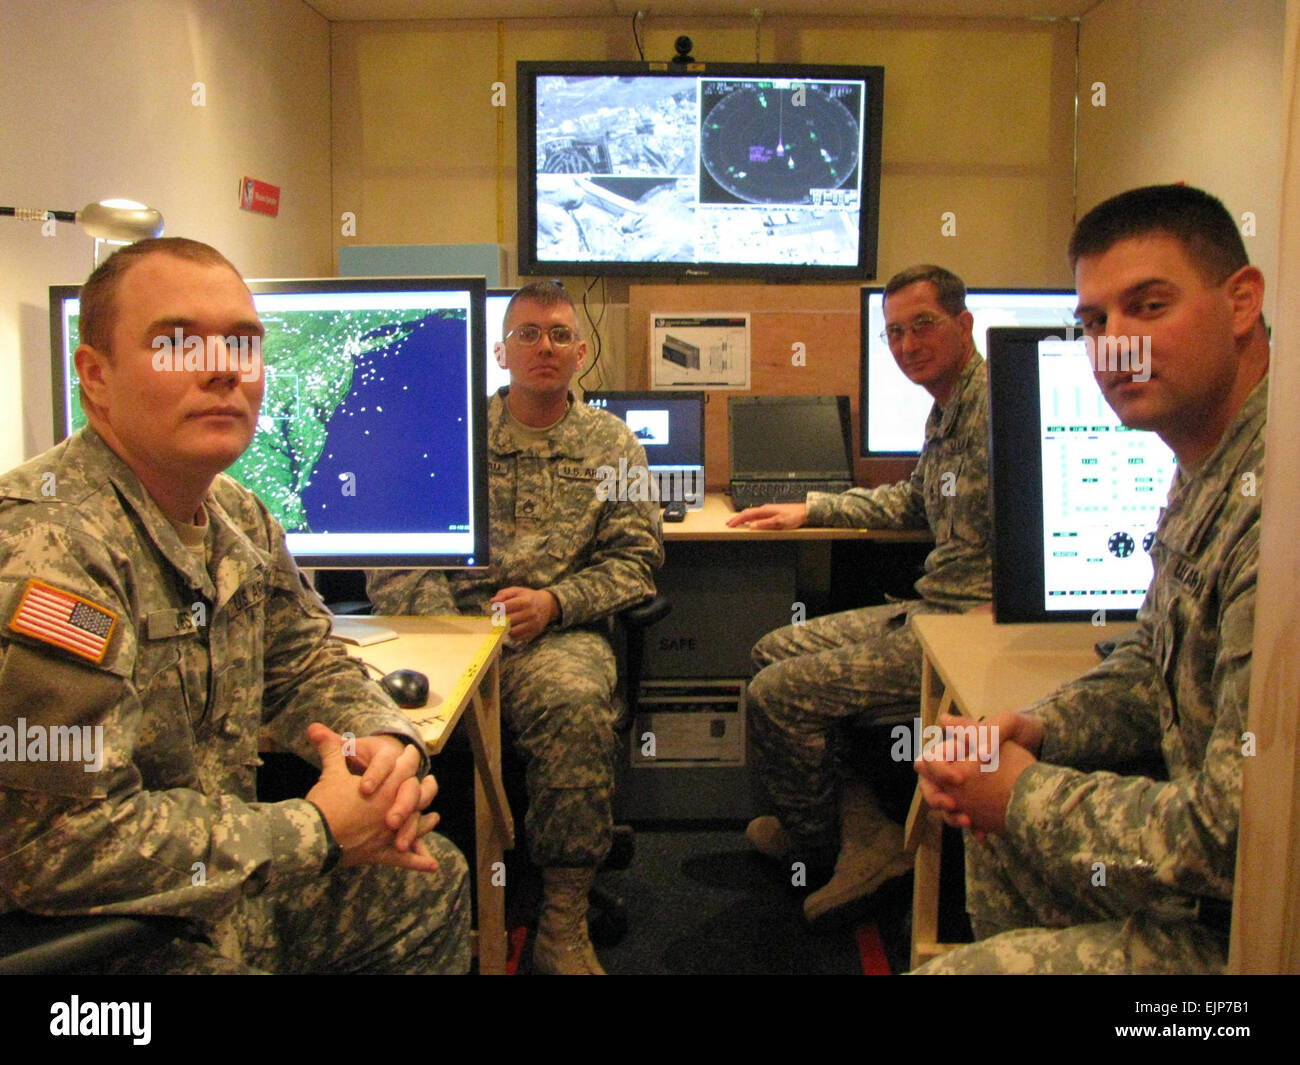 Soldiers from Fort Bliss, Texas, try the prototype communication and control station for the Joint Land Attack Elevated Netted Sensor System. From left are 2nd Lt. Mike Jones, Staff Sgt. David Brandau, Master Sgt. Greg Heidenescher and Chief Warrant Officer 3 Chad Sneller.  Samuel Vaughn Stock Photo